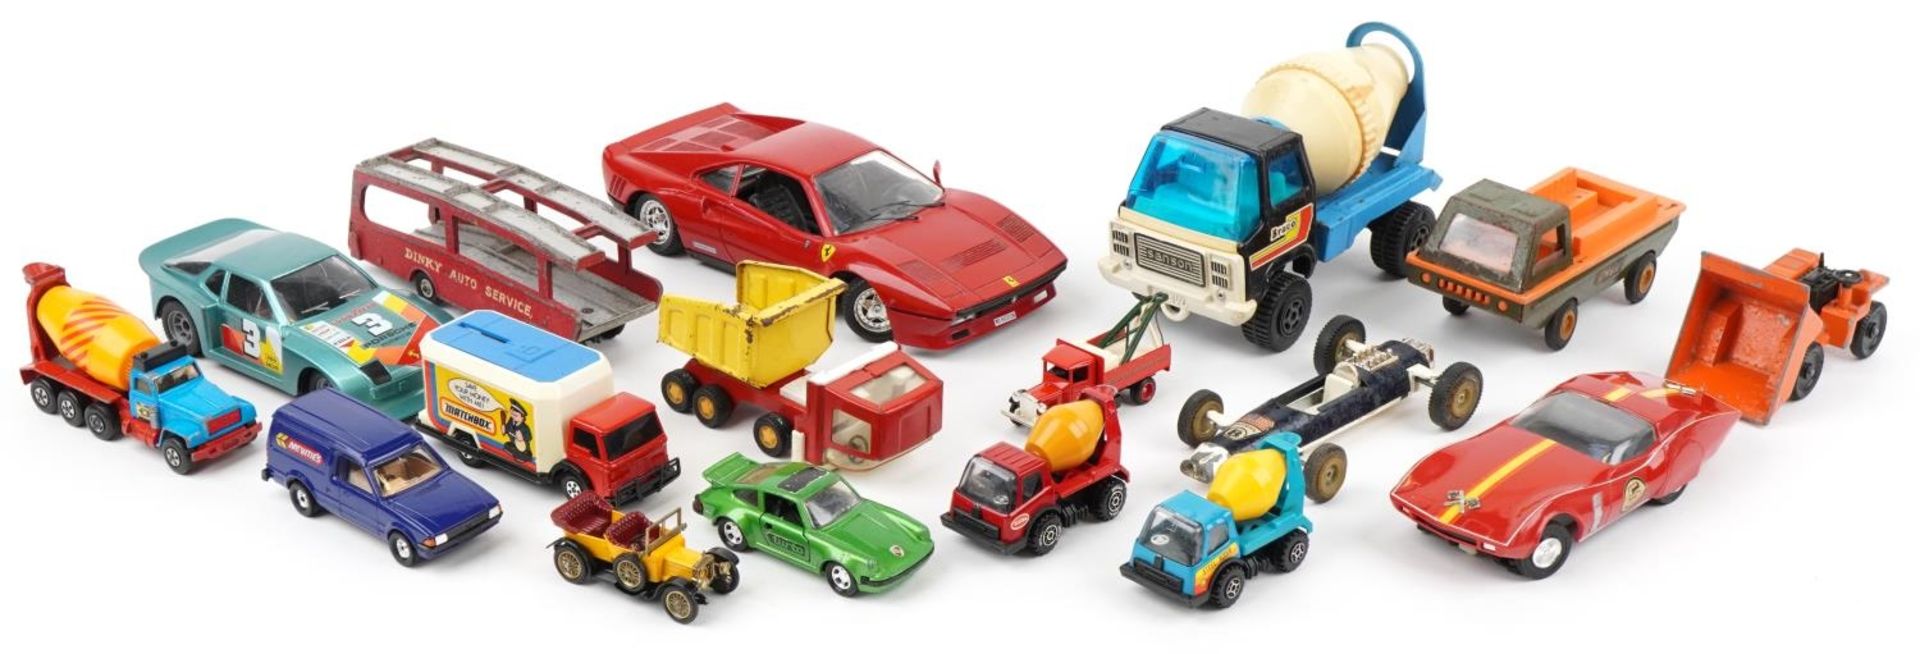 Vintage and later vehicles, some diecast, including Tri-ang and Polistil : For further information